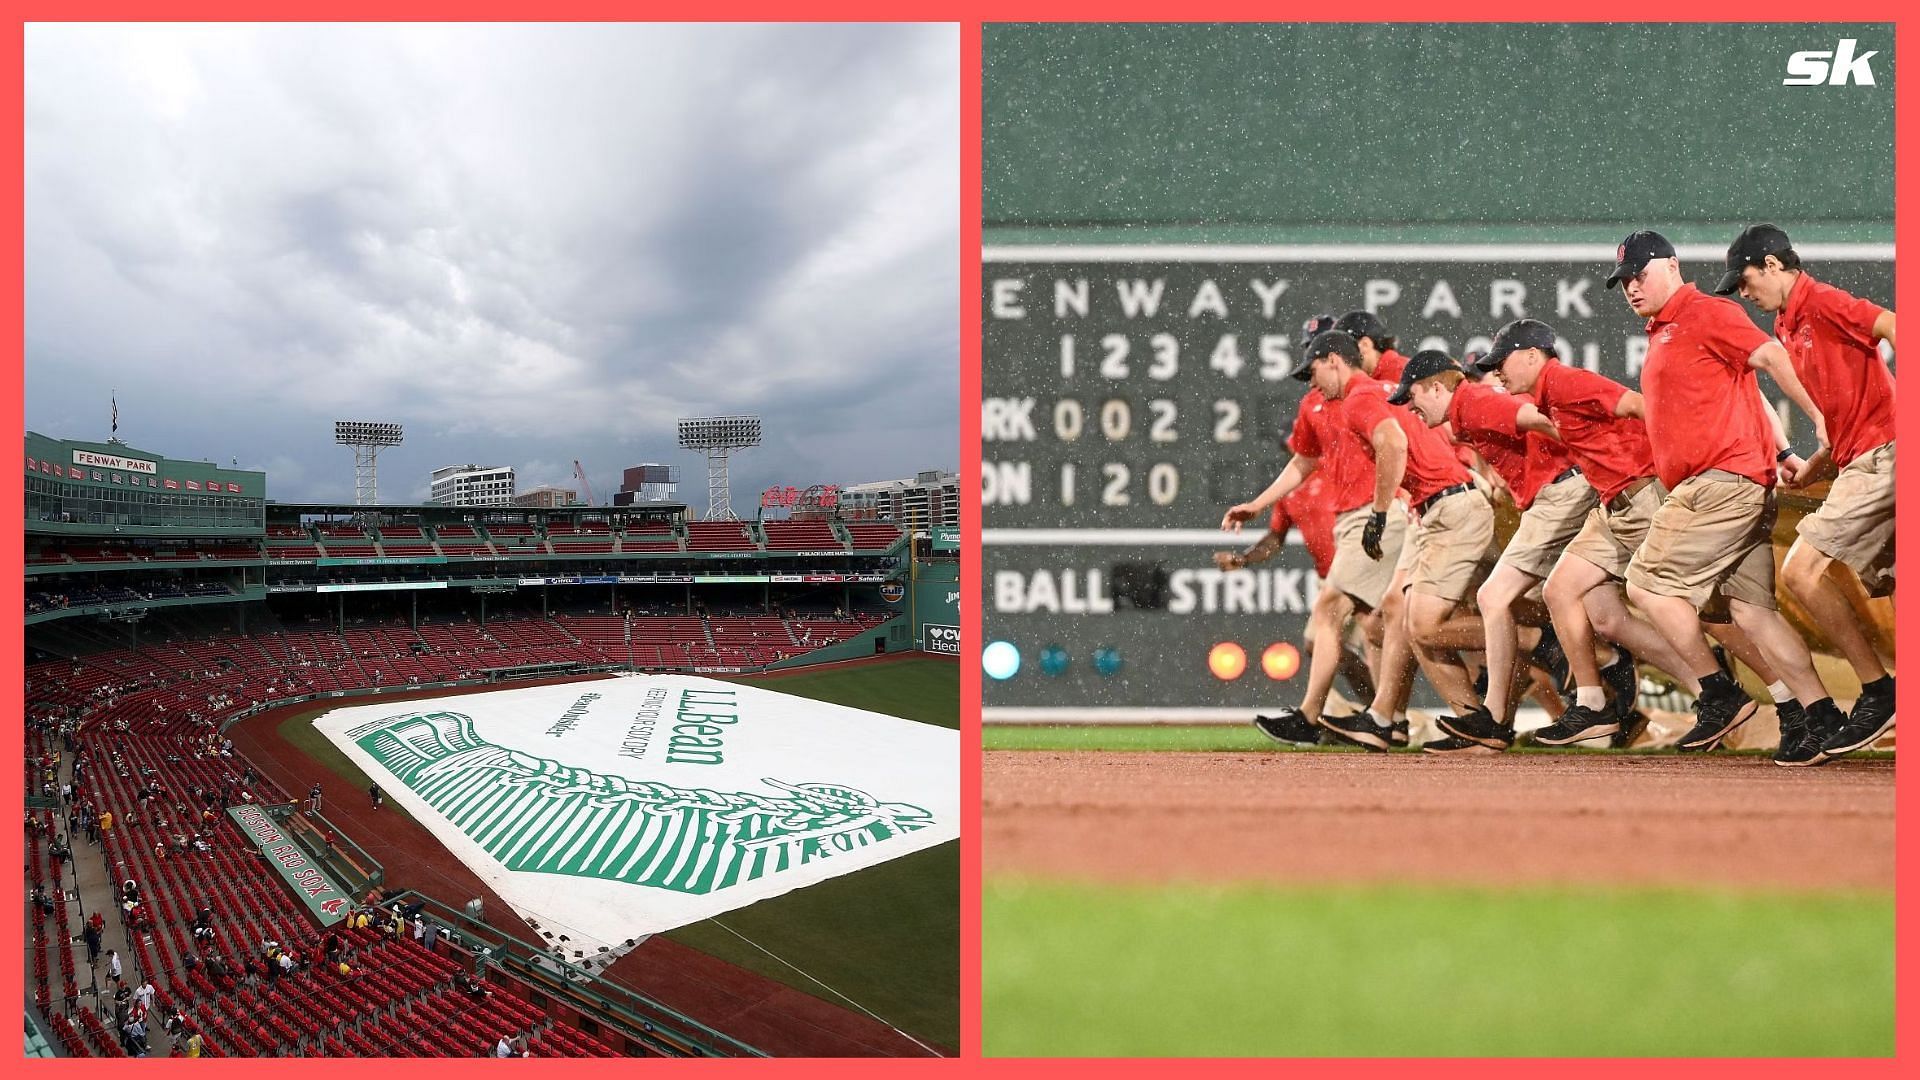 Fenway Park was covered by the tarp as the game between the Red Sox and Mets was postponed due to a rain delay.